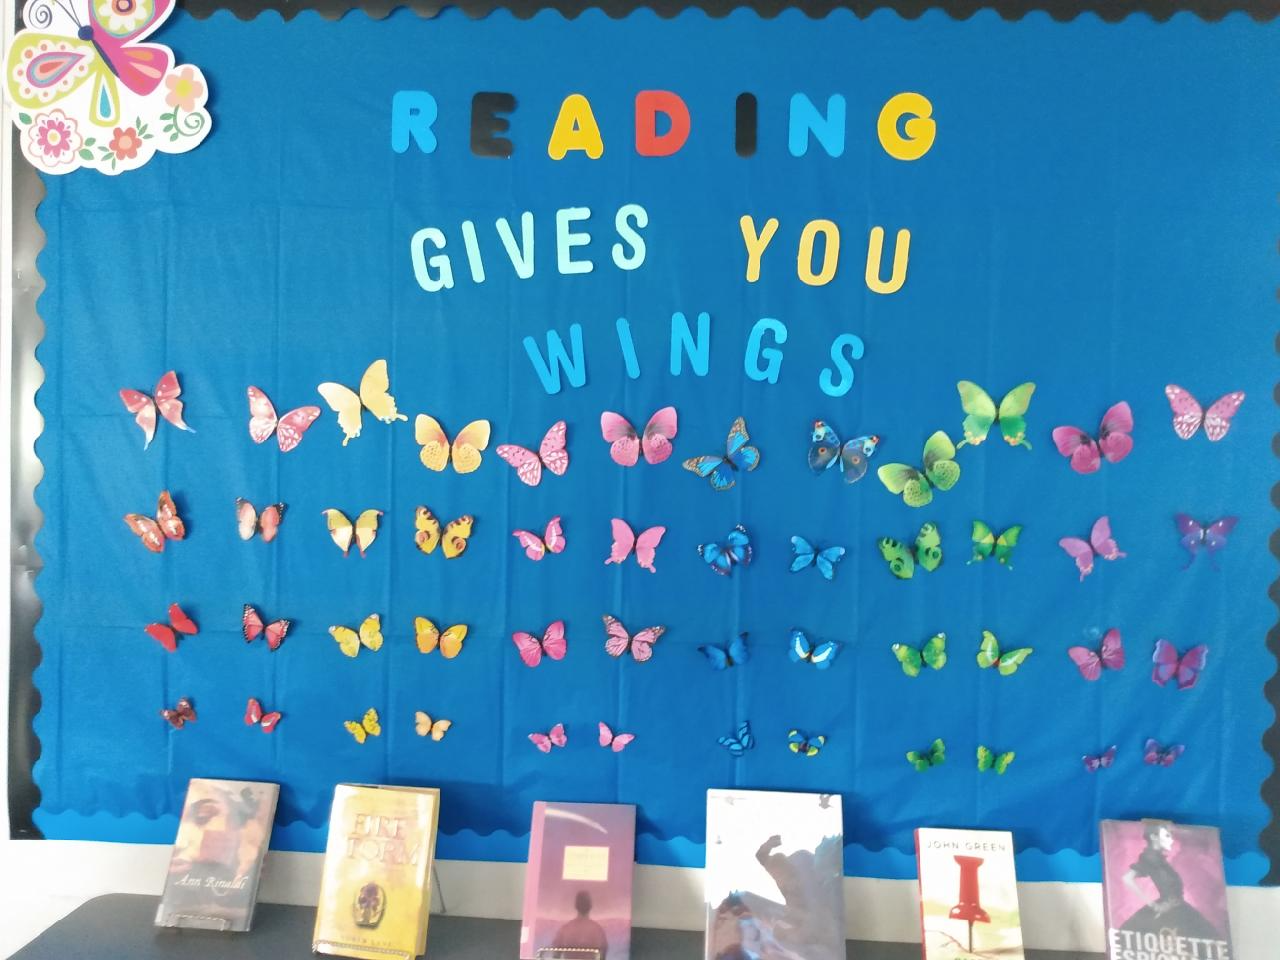 Library Display "Reading Gives You Wings"